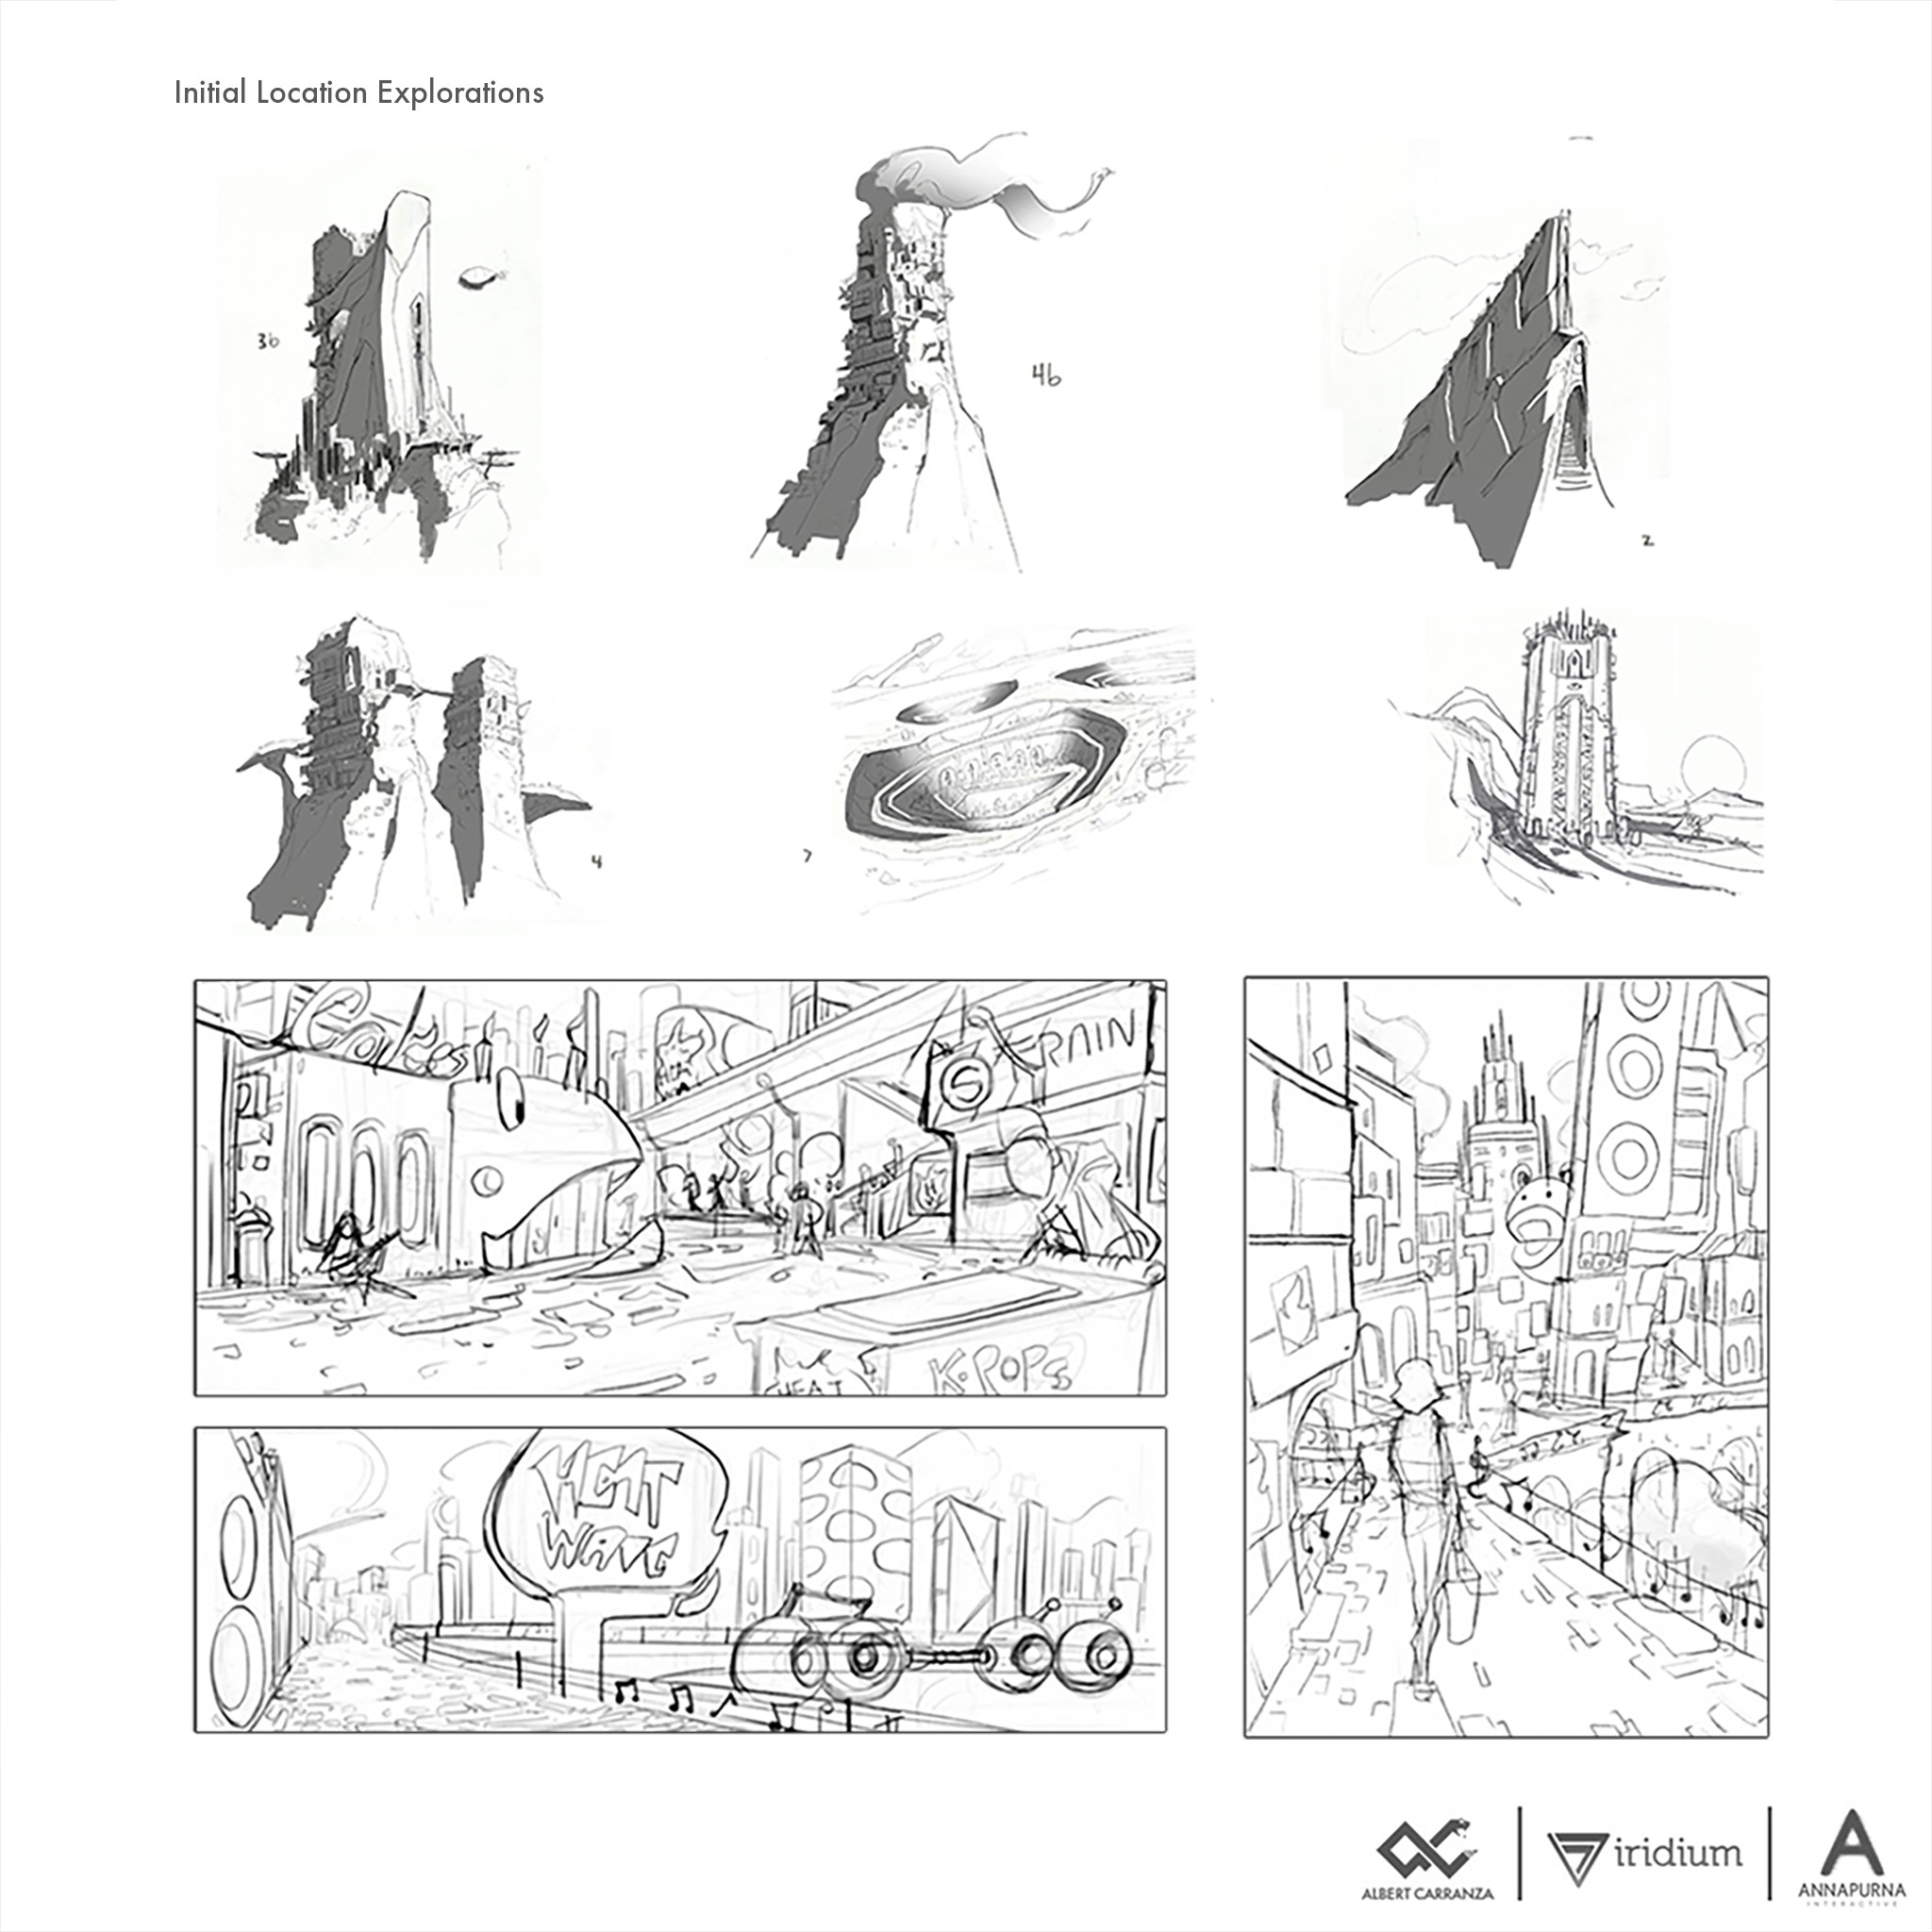 Concepts for an RPG from Iridium Games and Annapurna Interactive